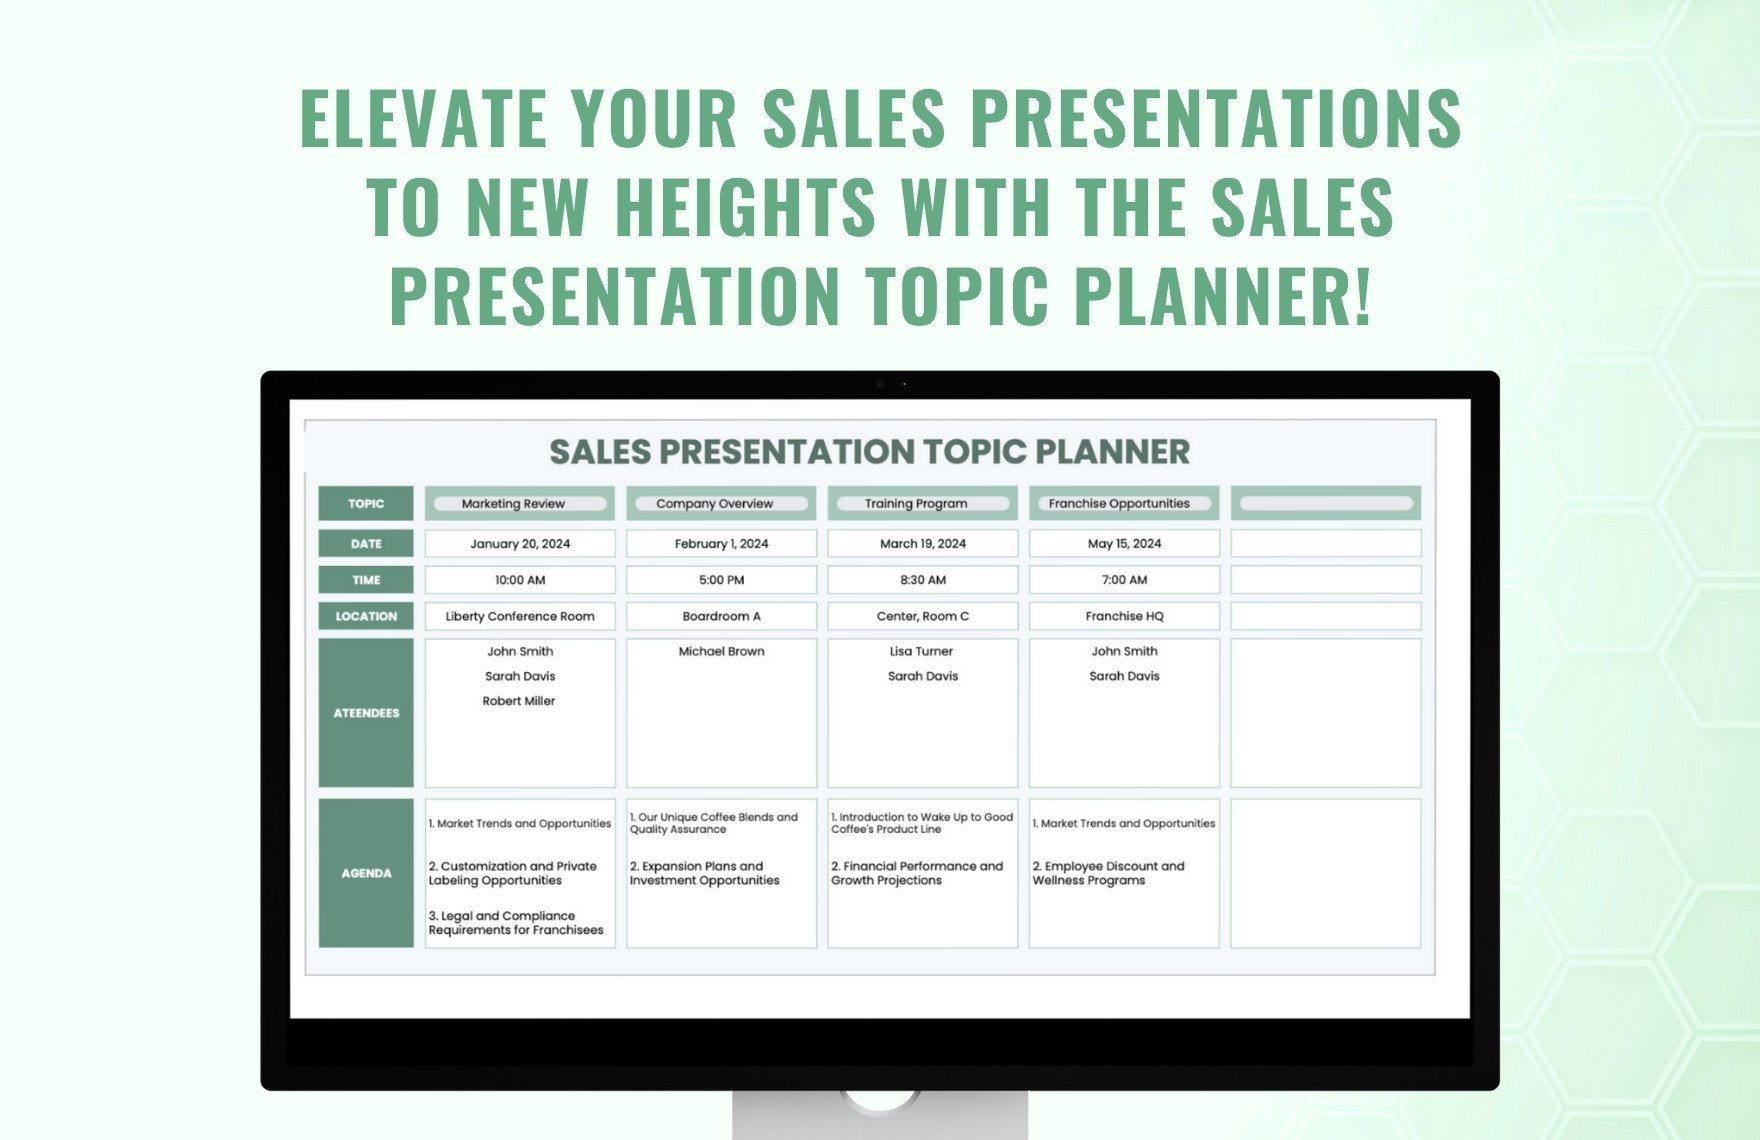 Sales Presentation Topic Planner Template